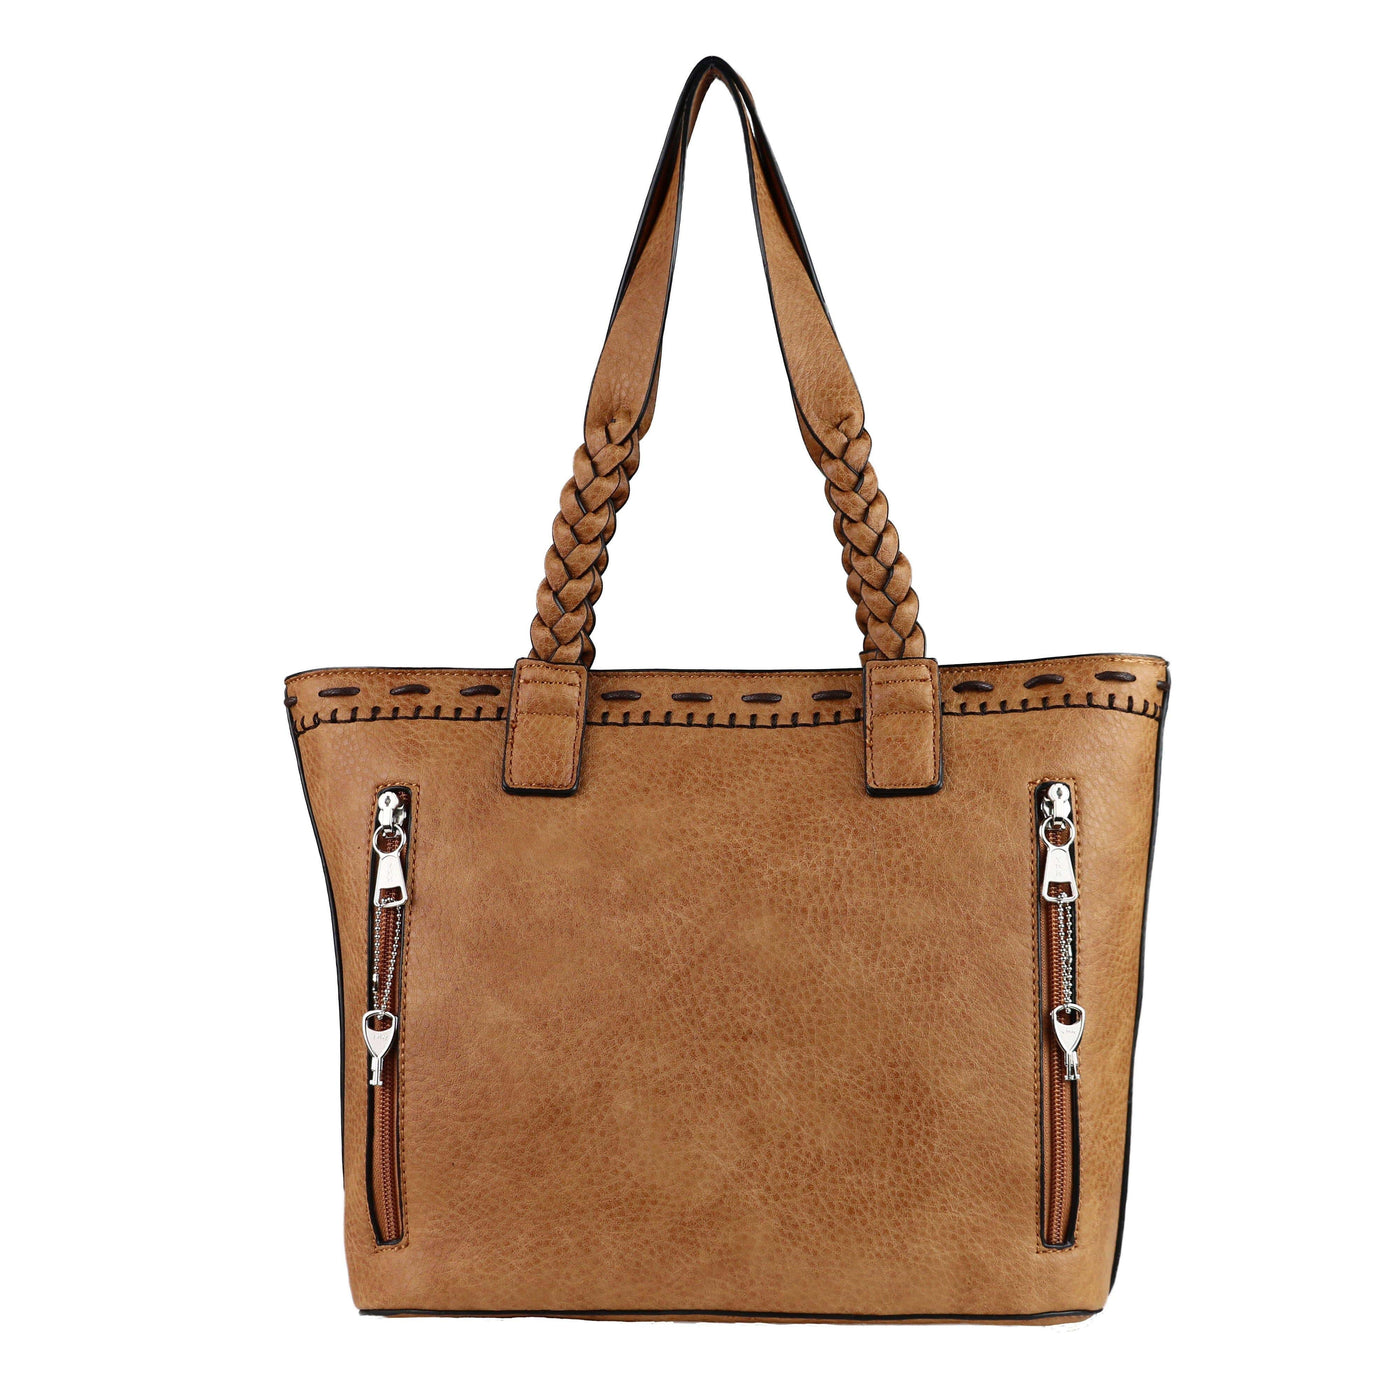 Sadie Leather Satchel | Concealed Carry Purses for Women –  www.itsinthebagboutique.com